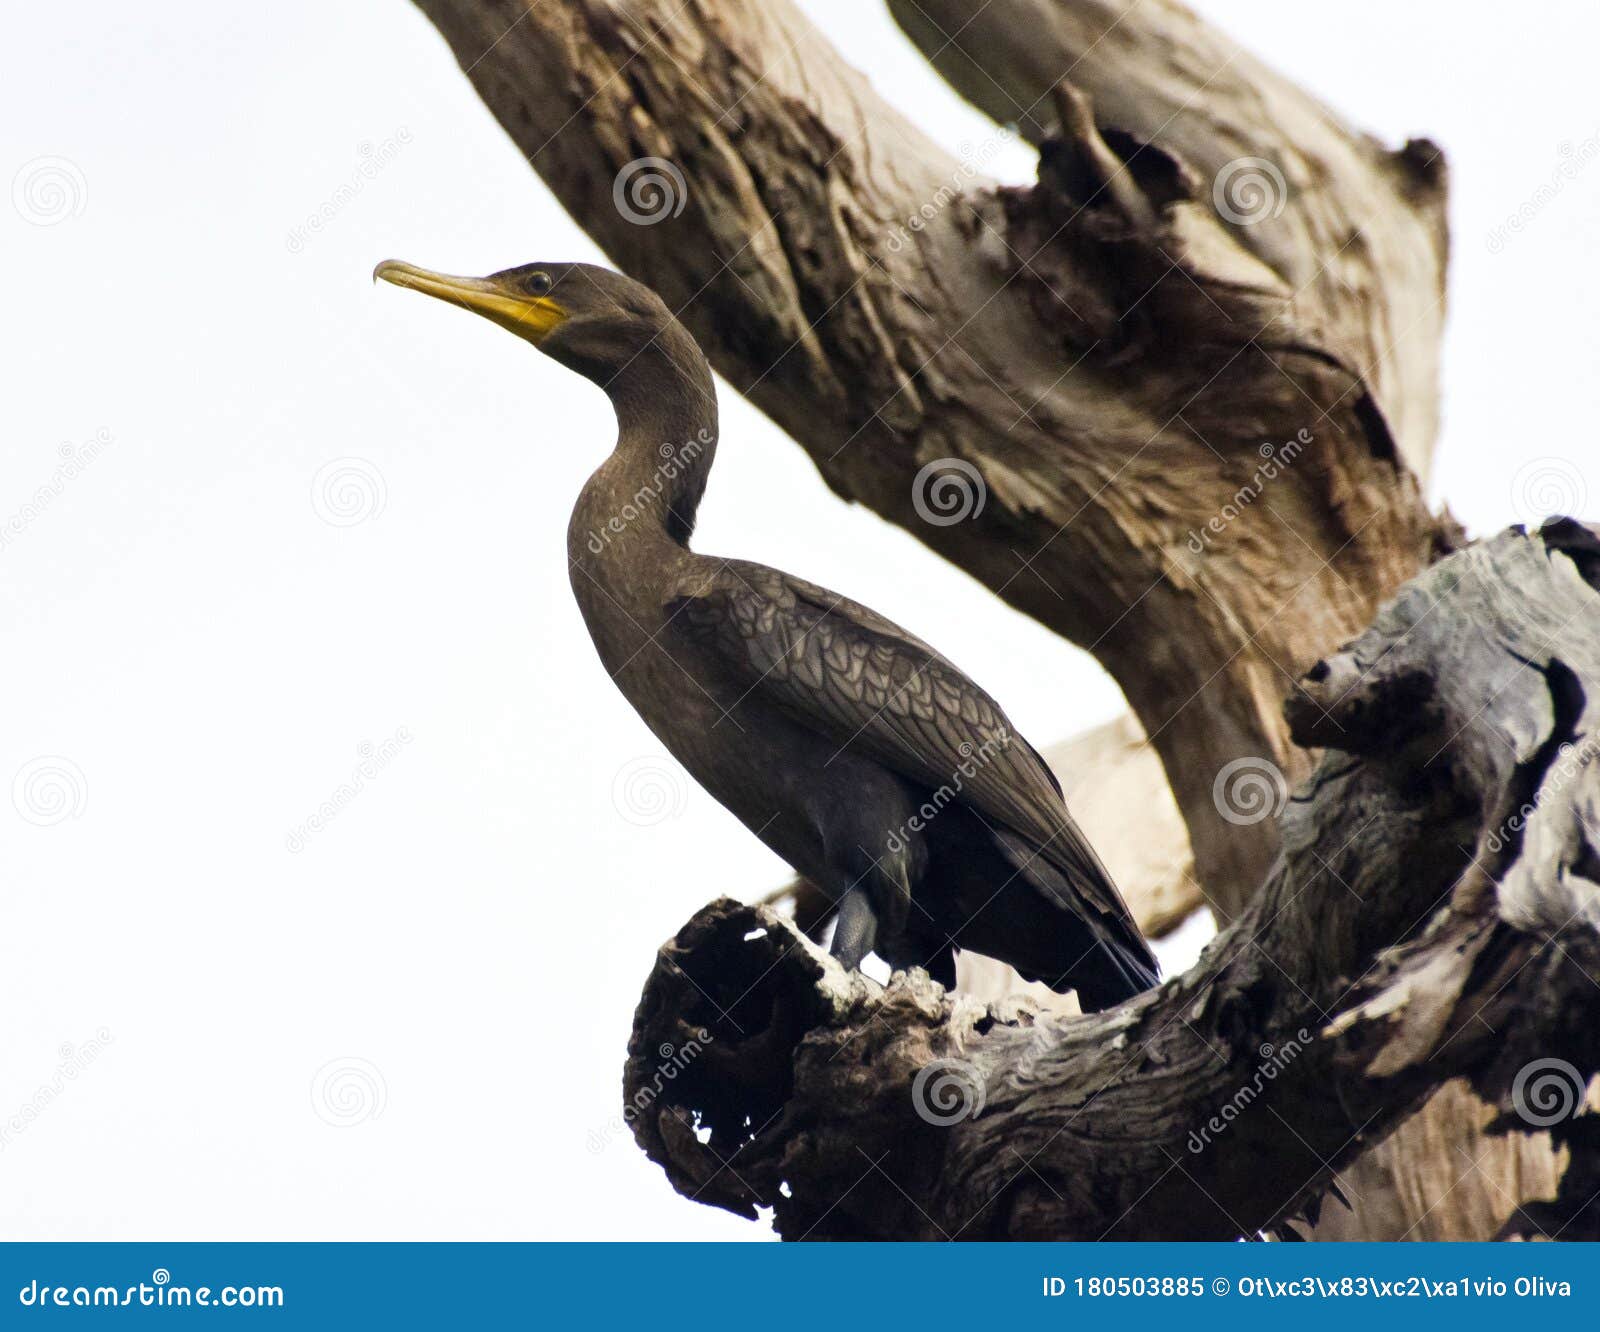 a cormorant, perched on a tree branch, in pantanal, brazil.